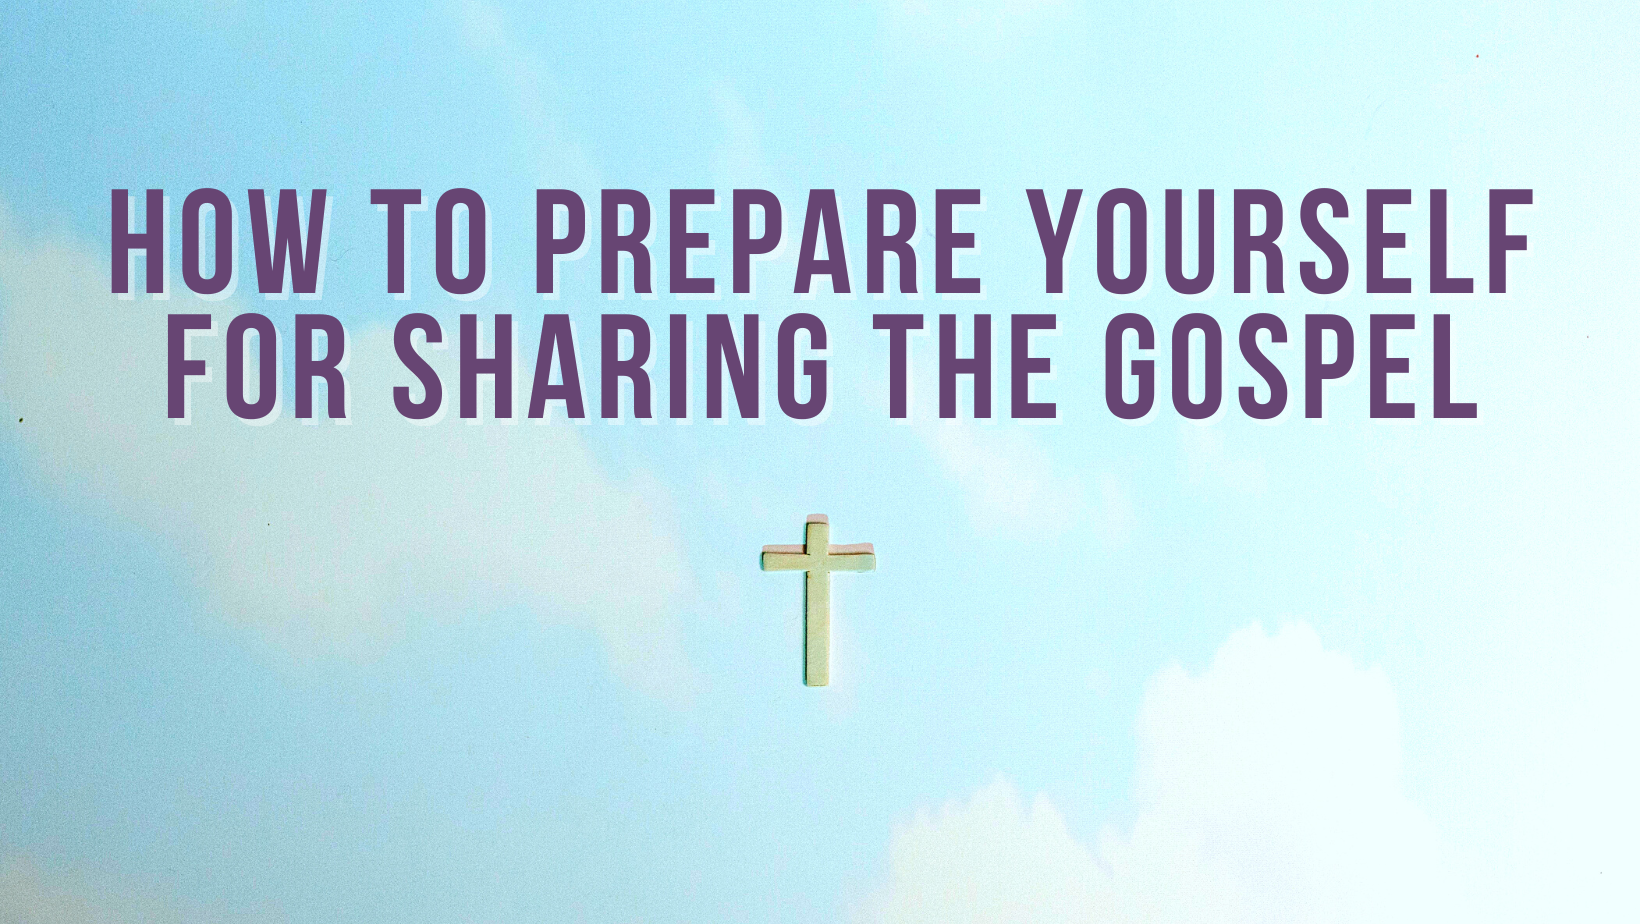 How to prepare yourself for sharing the Gospel